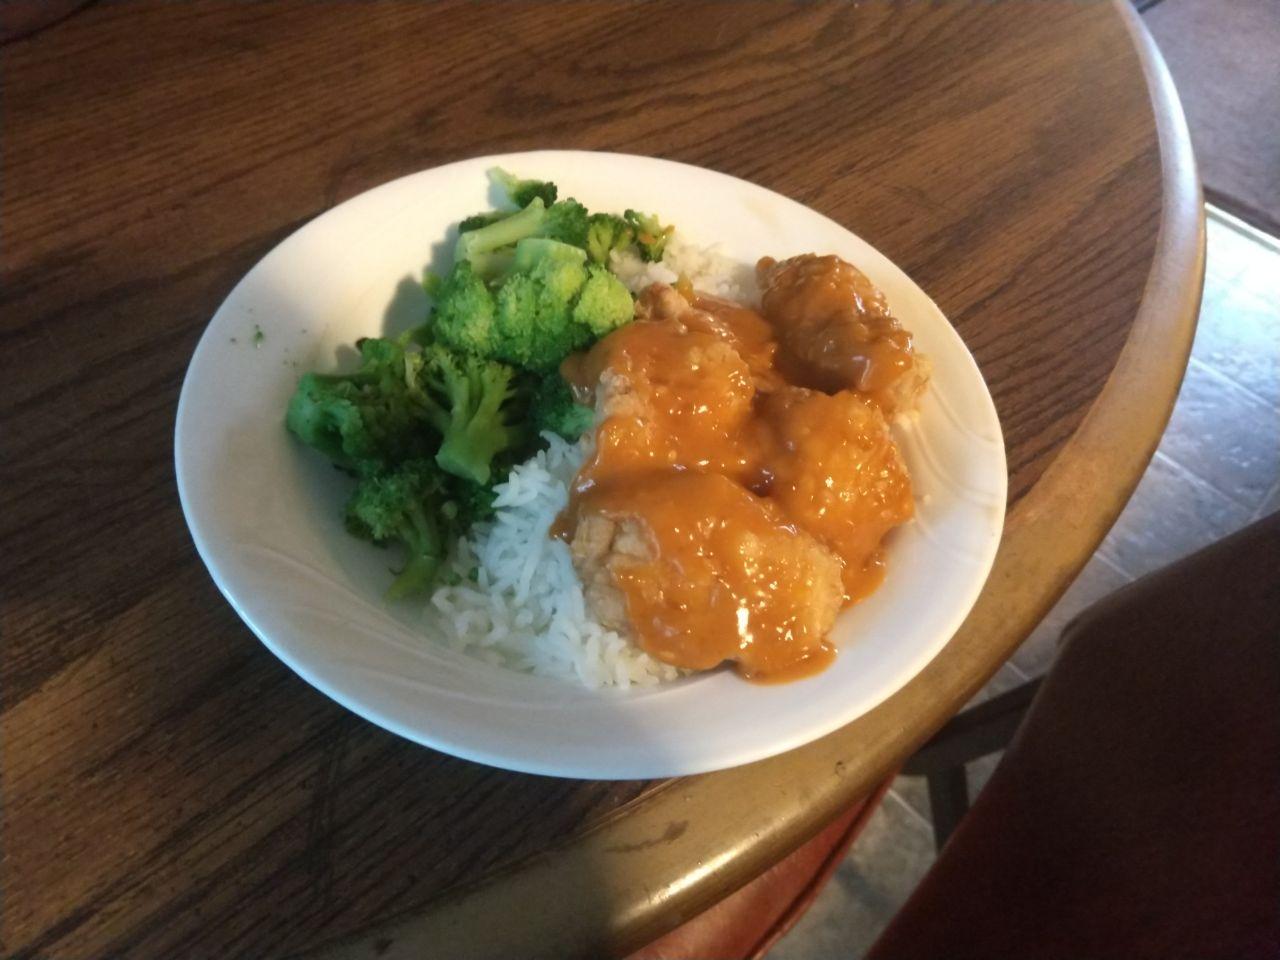 Sesame chicken with rice and broccoli.